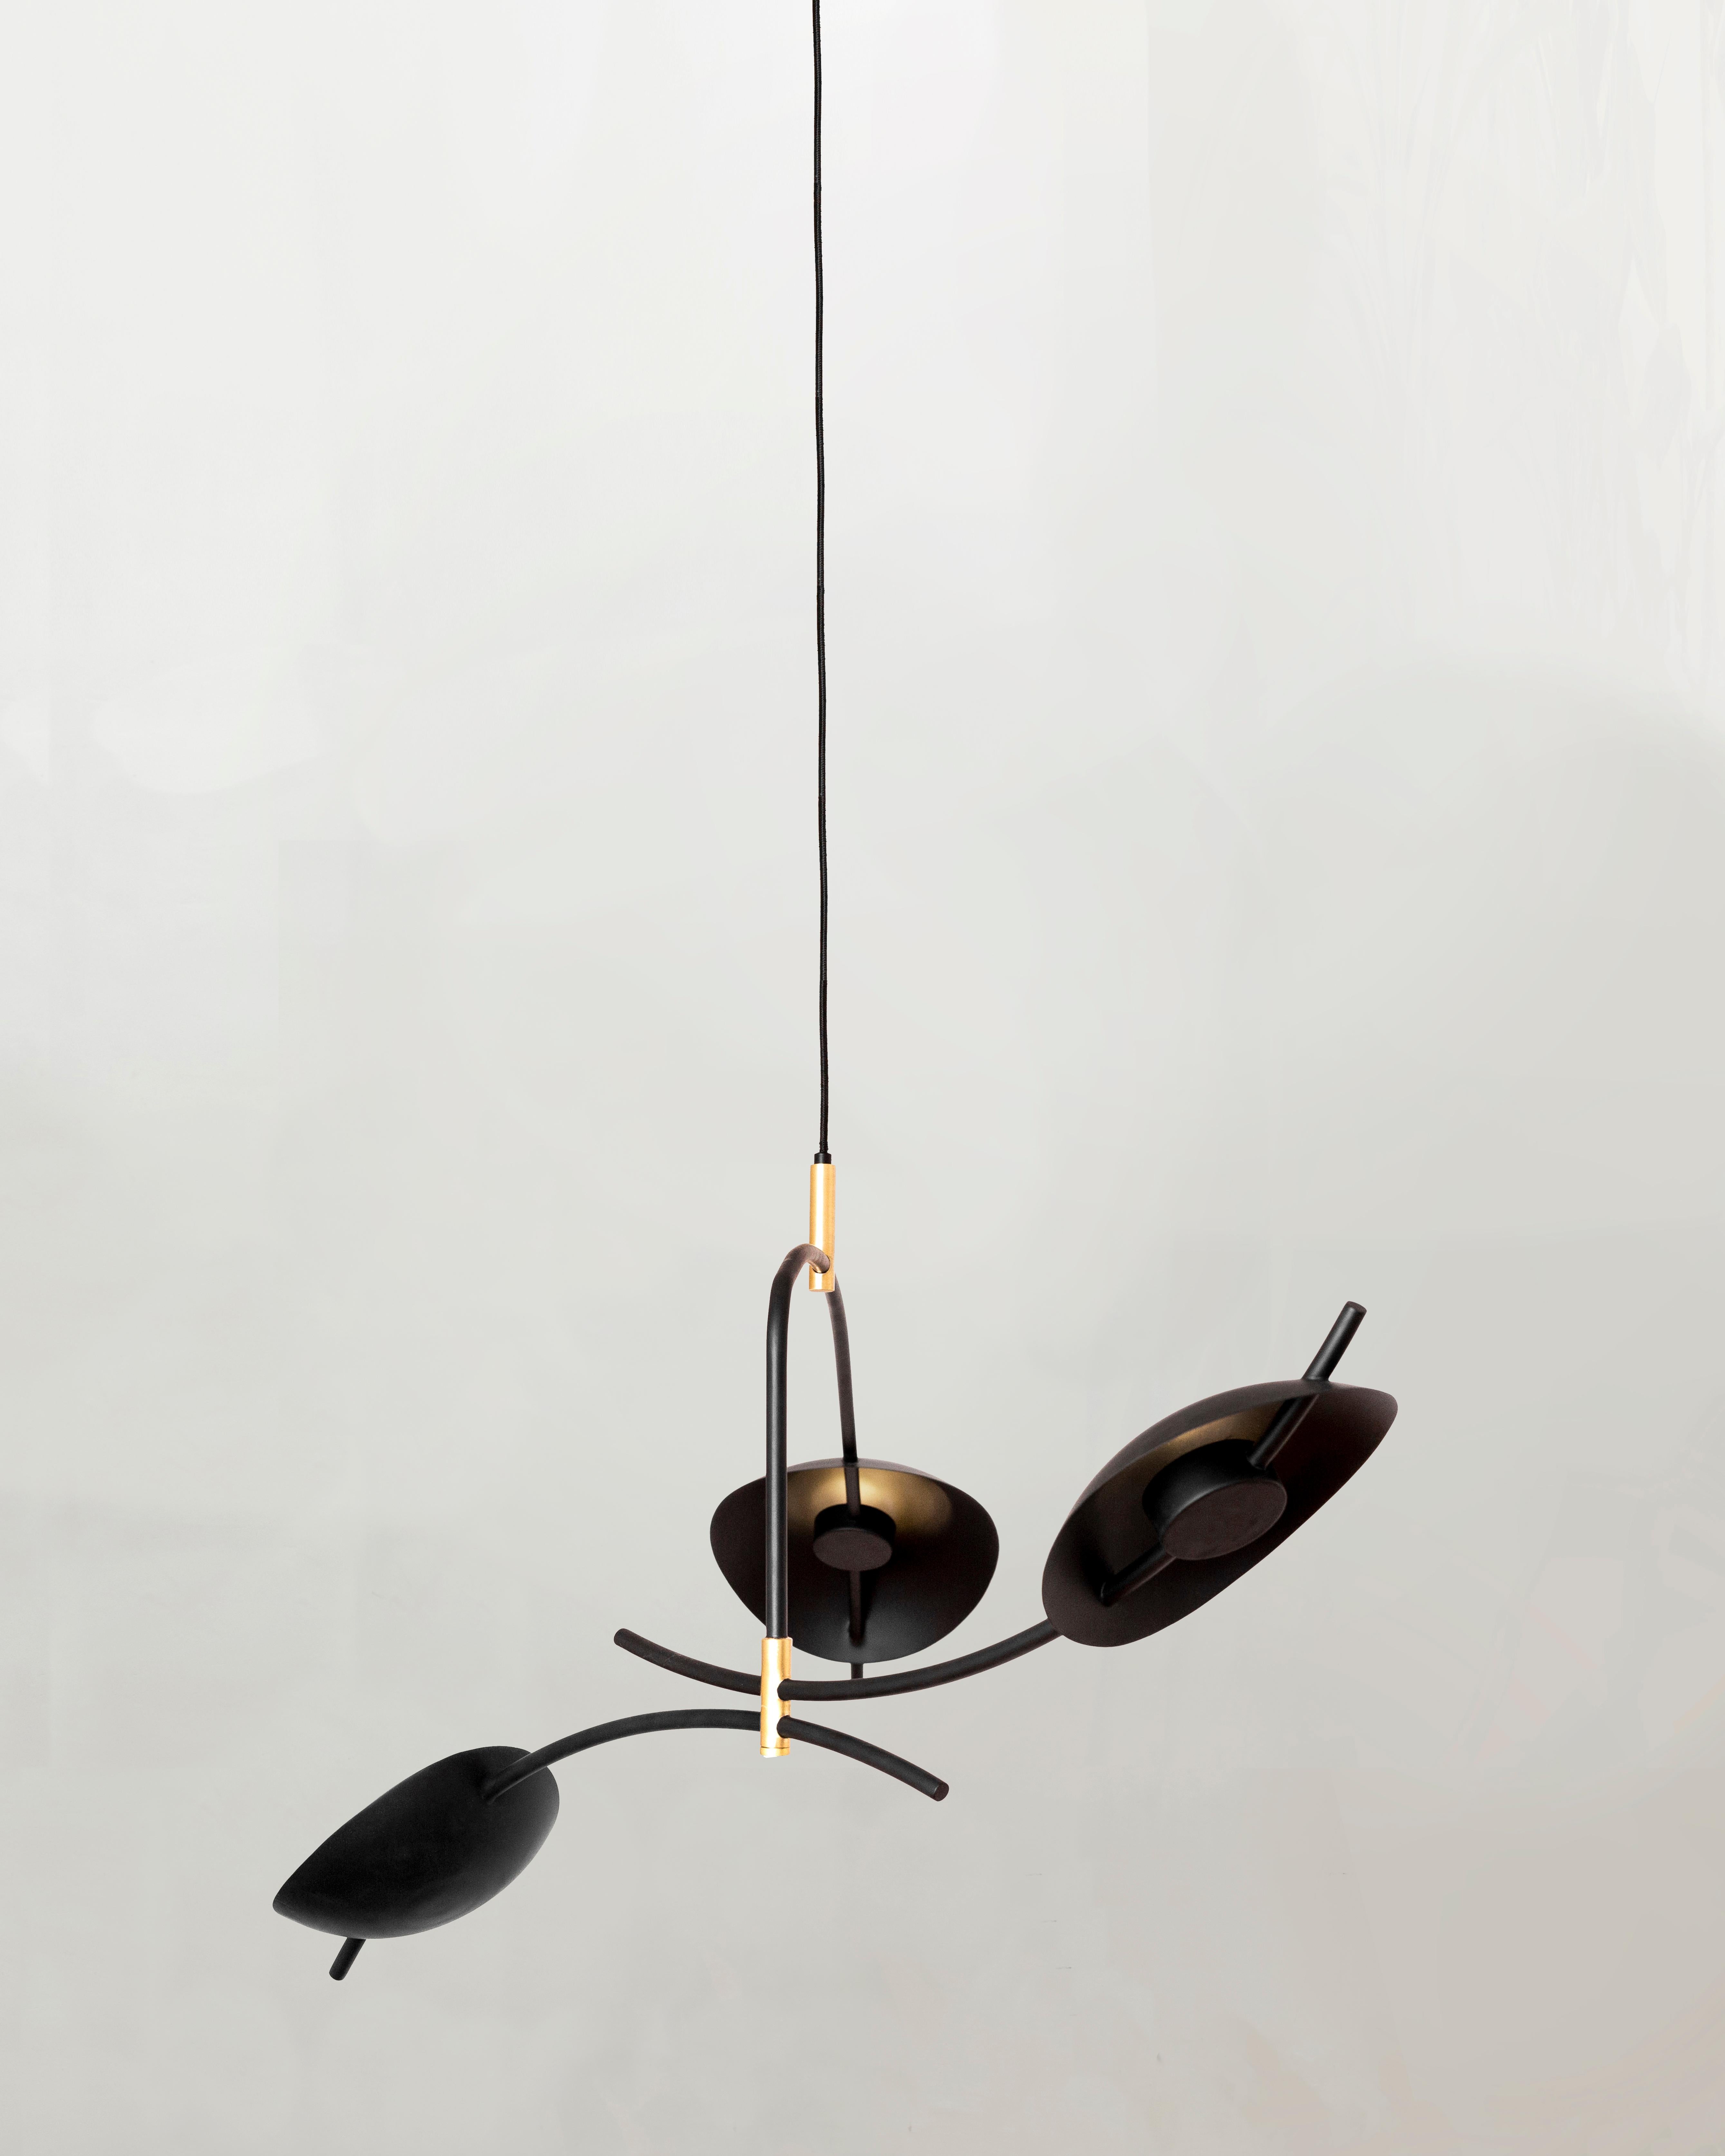 Hand-Crafted Espiga Mobile Lamp Pendant by Rebeca Cors